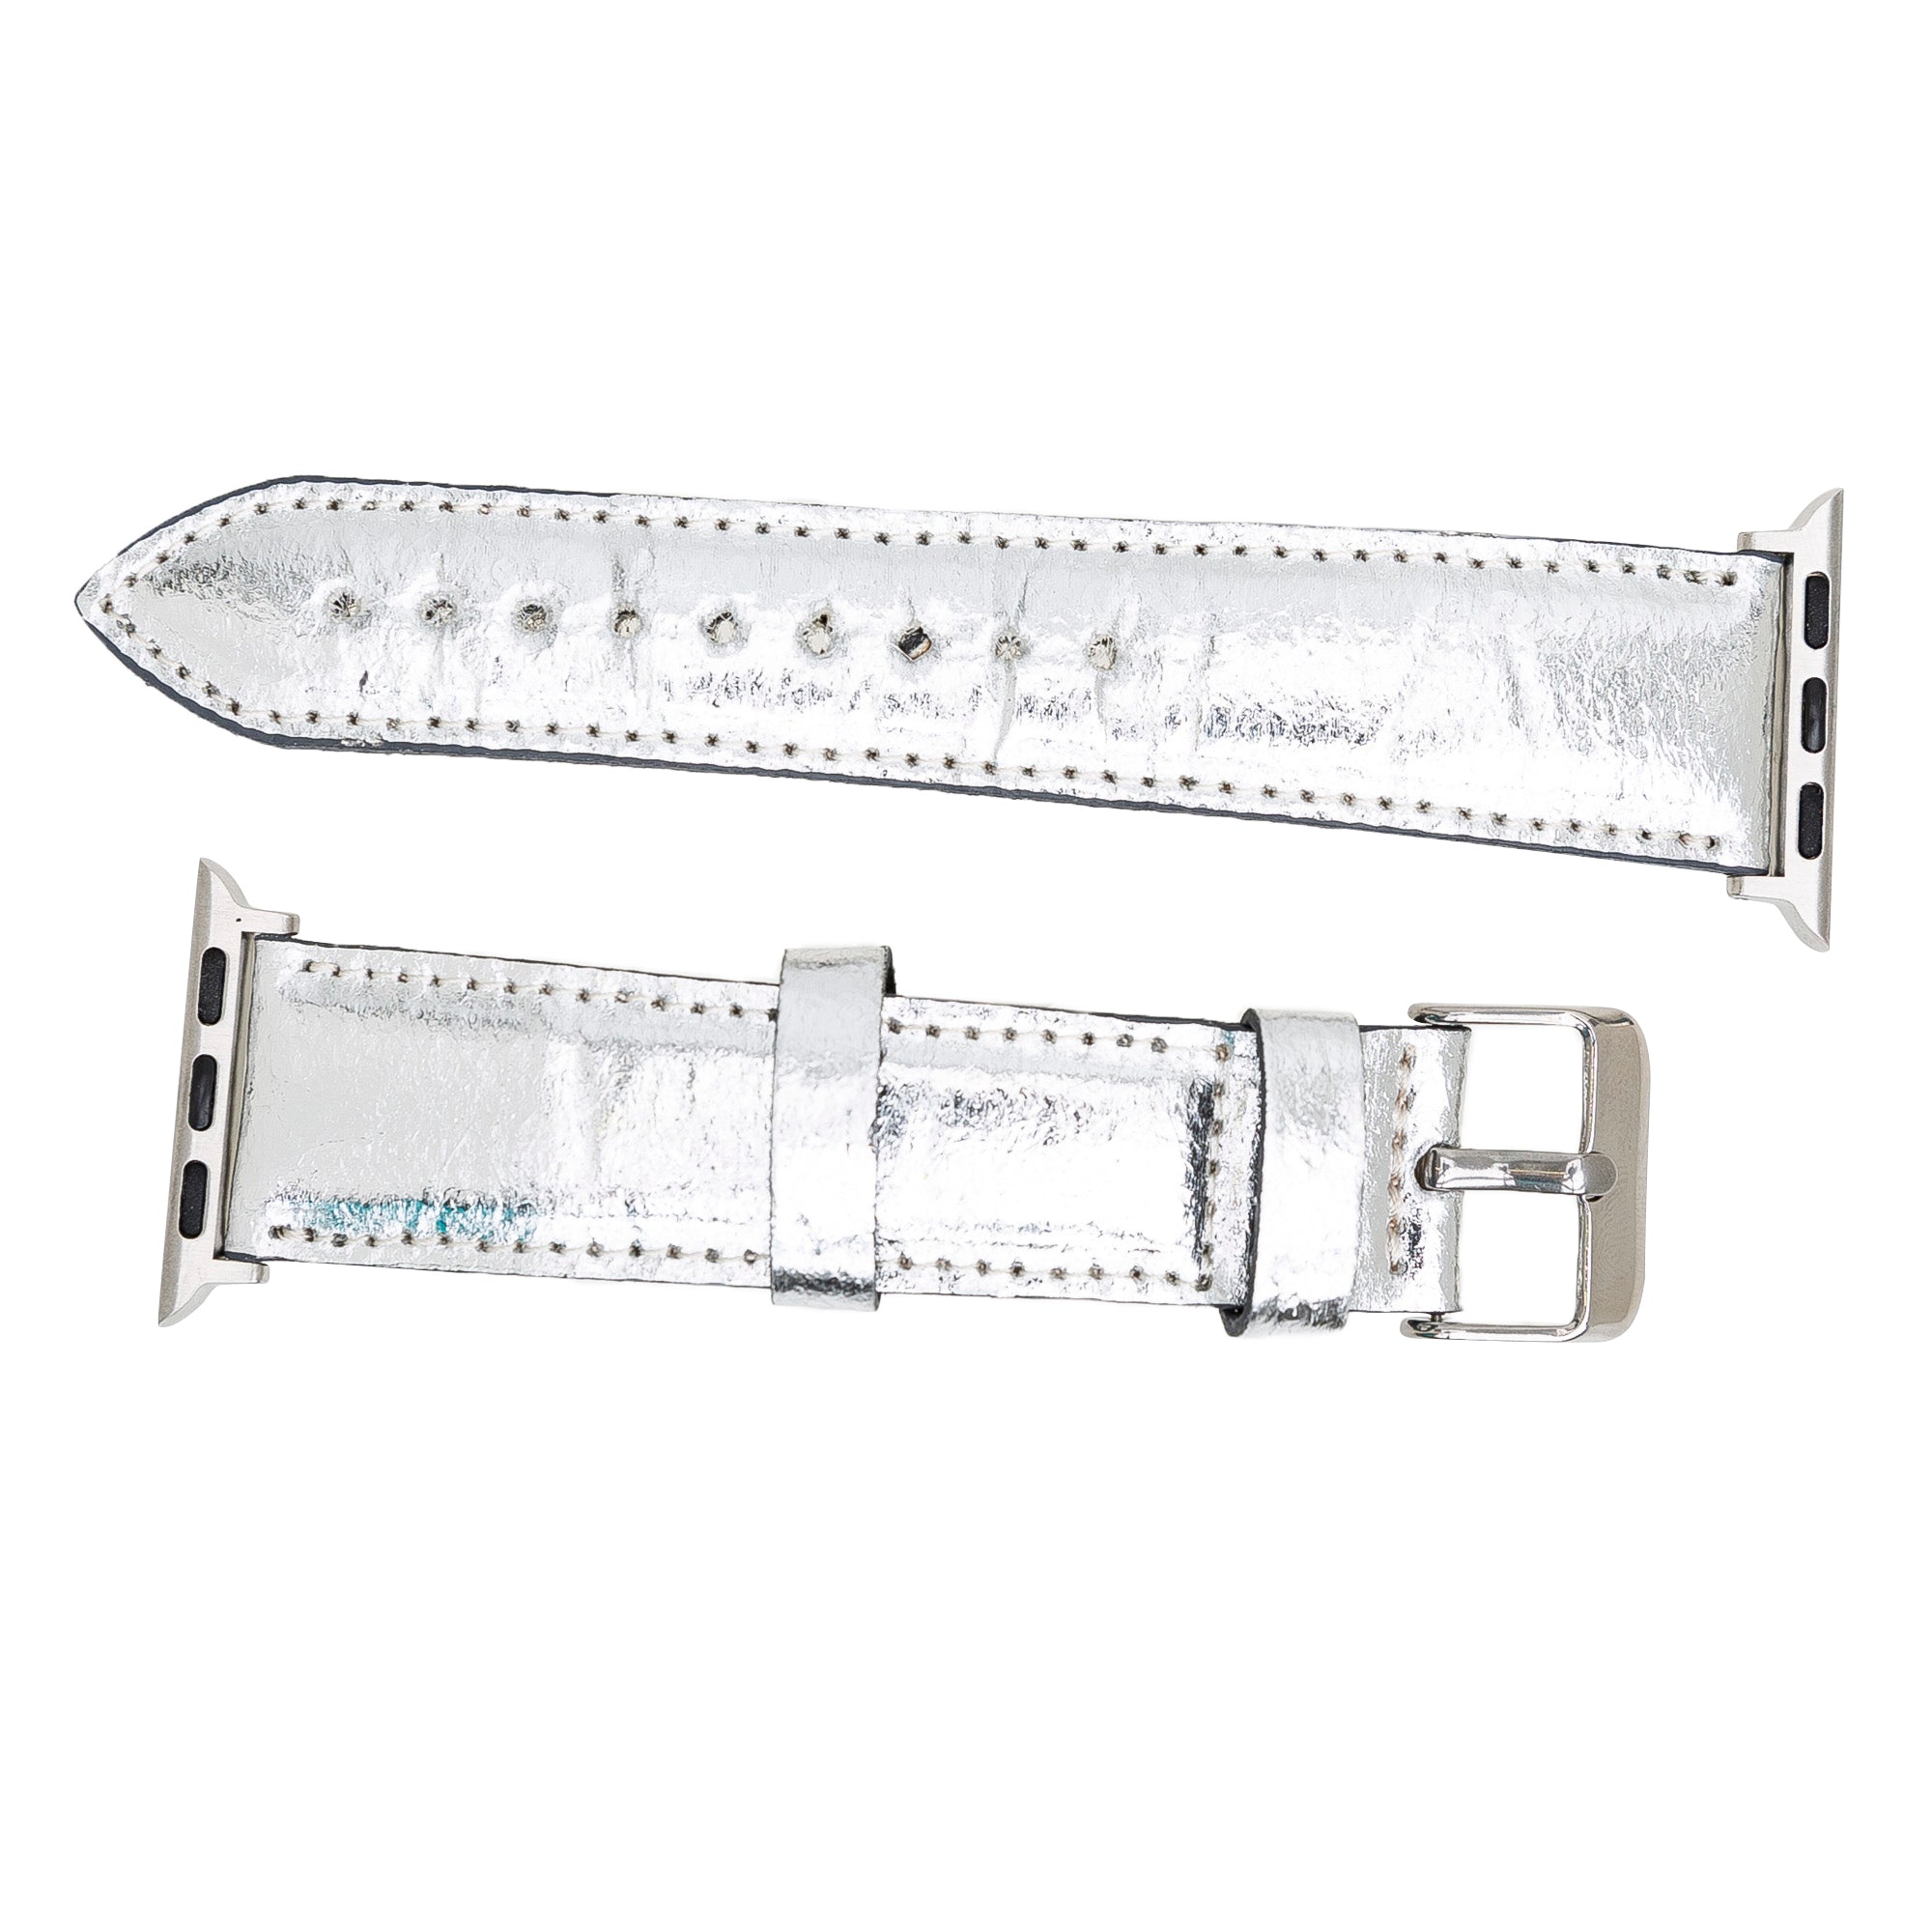 Double Tour Slim Watch Band-Vegan Leather